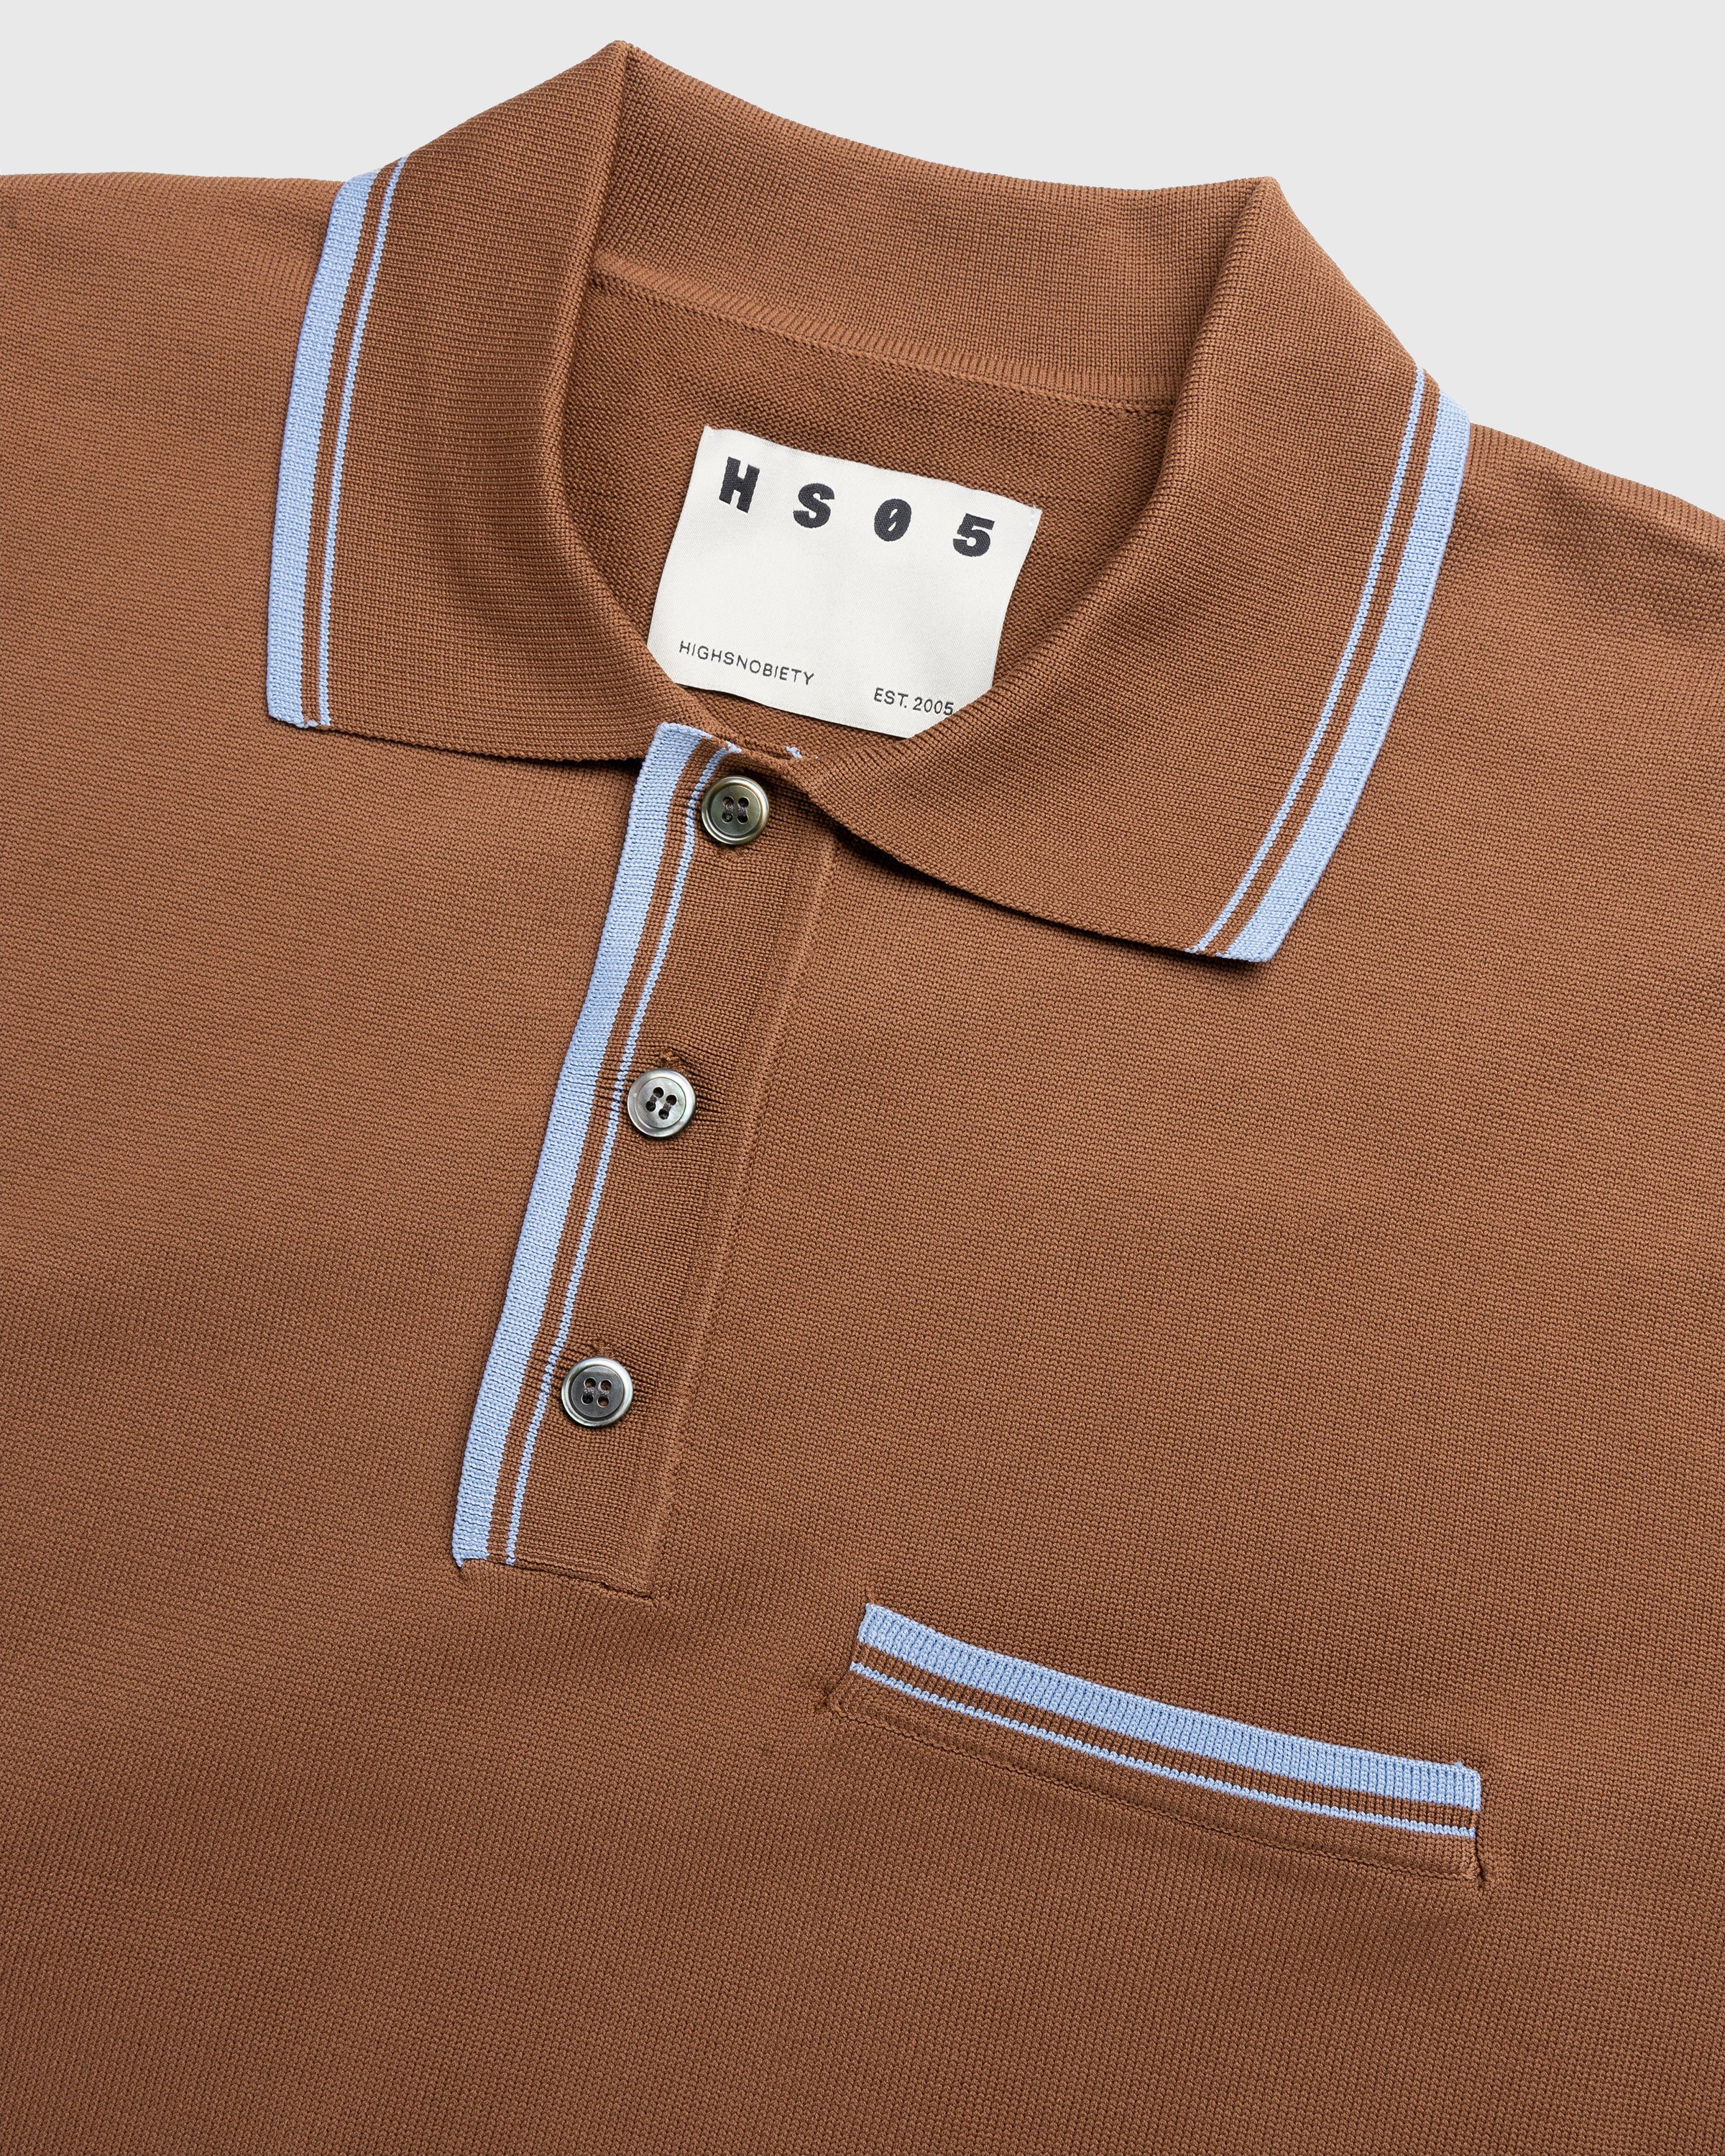 Highsnobiety HS05 - Long Sleeves Knit Polo Brown - Clothing - Brown - Image 6